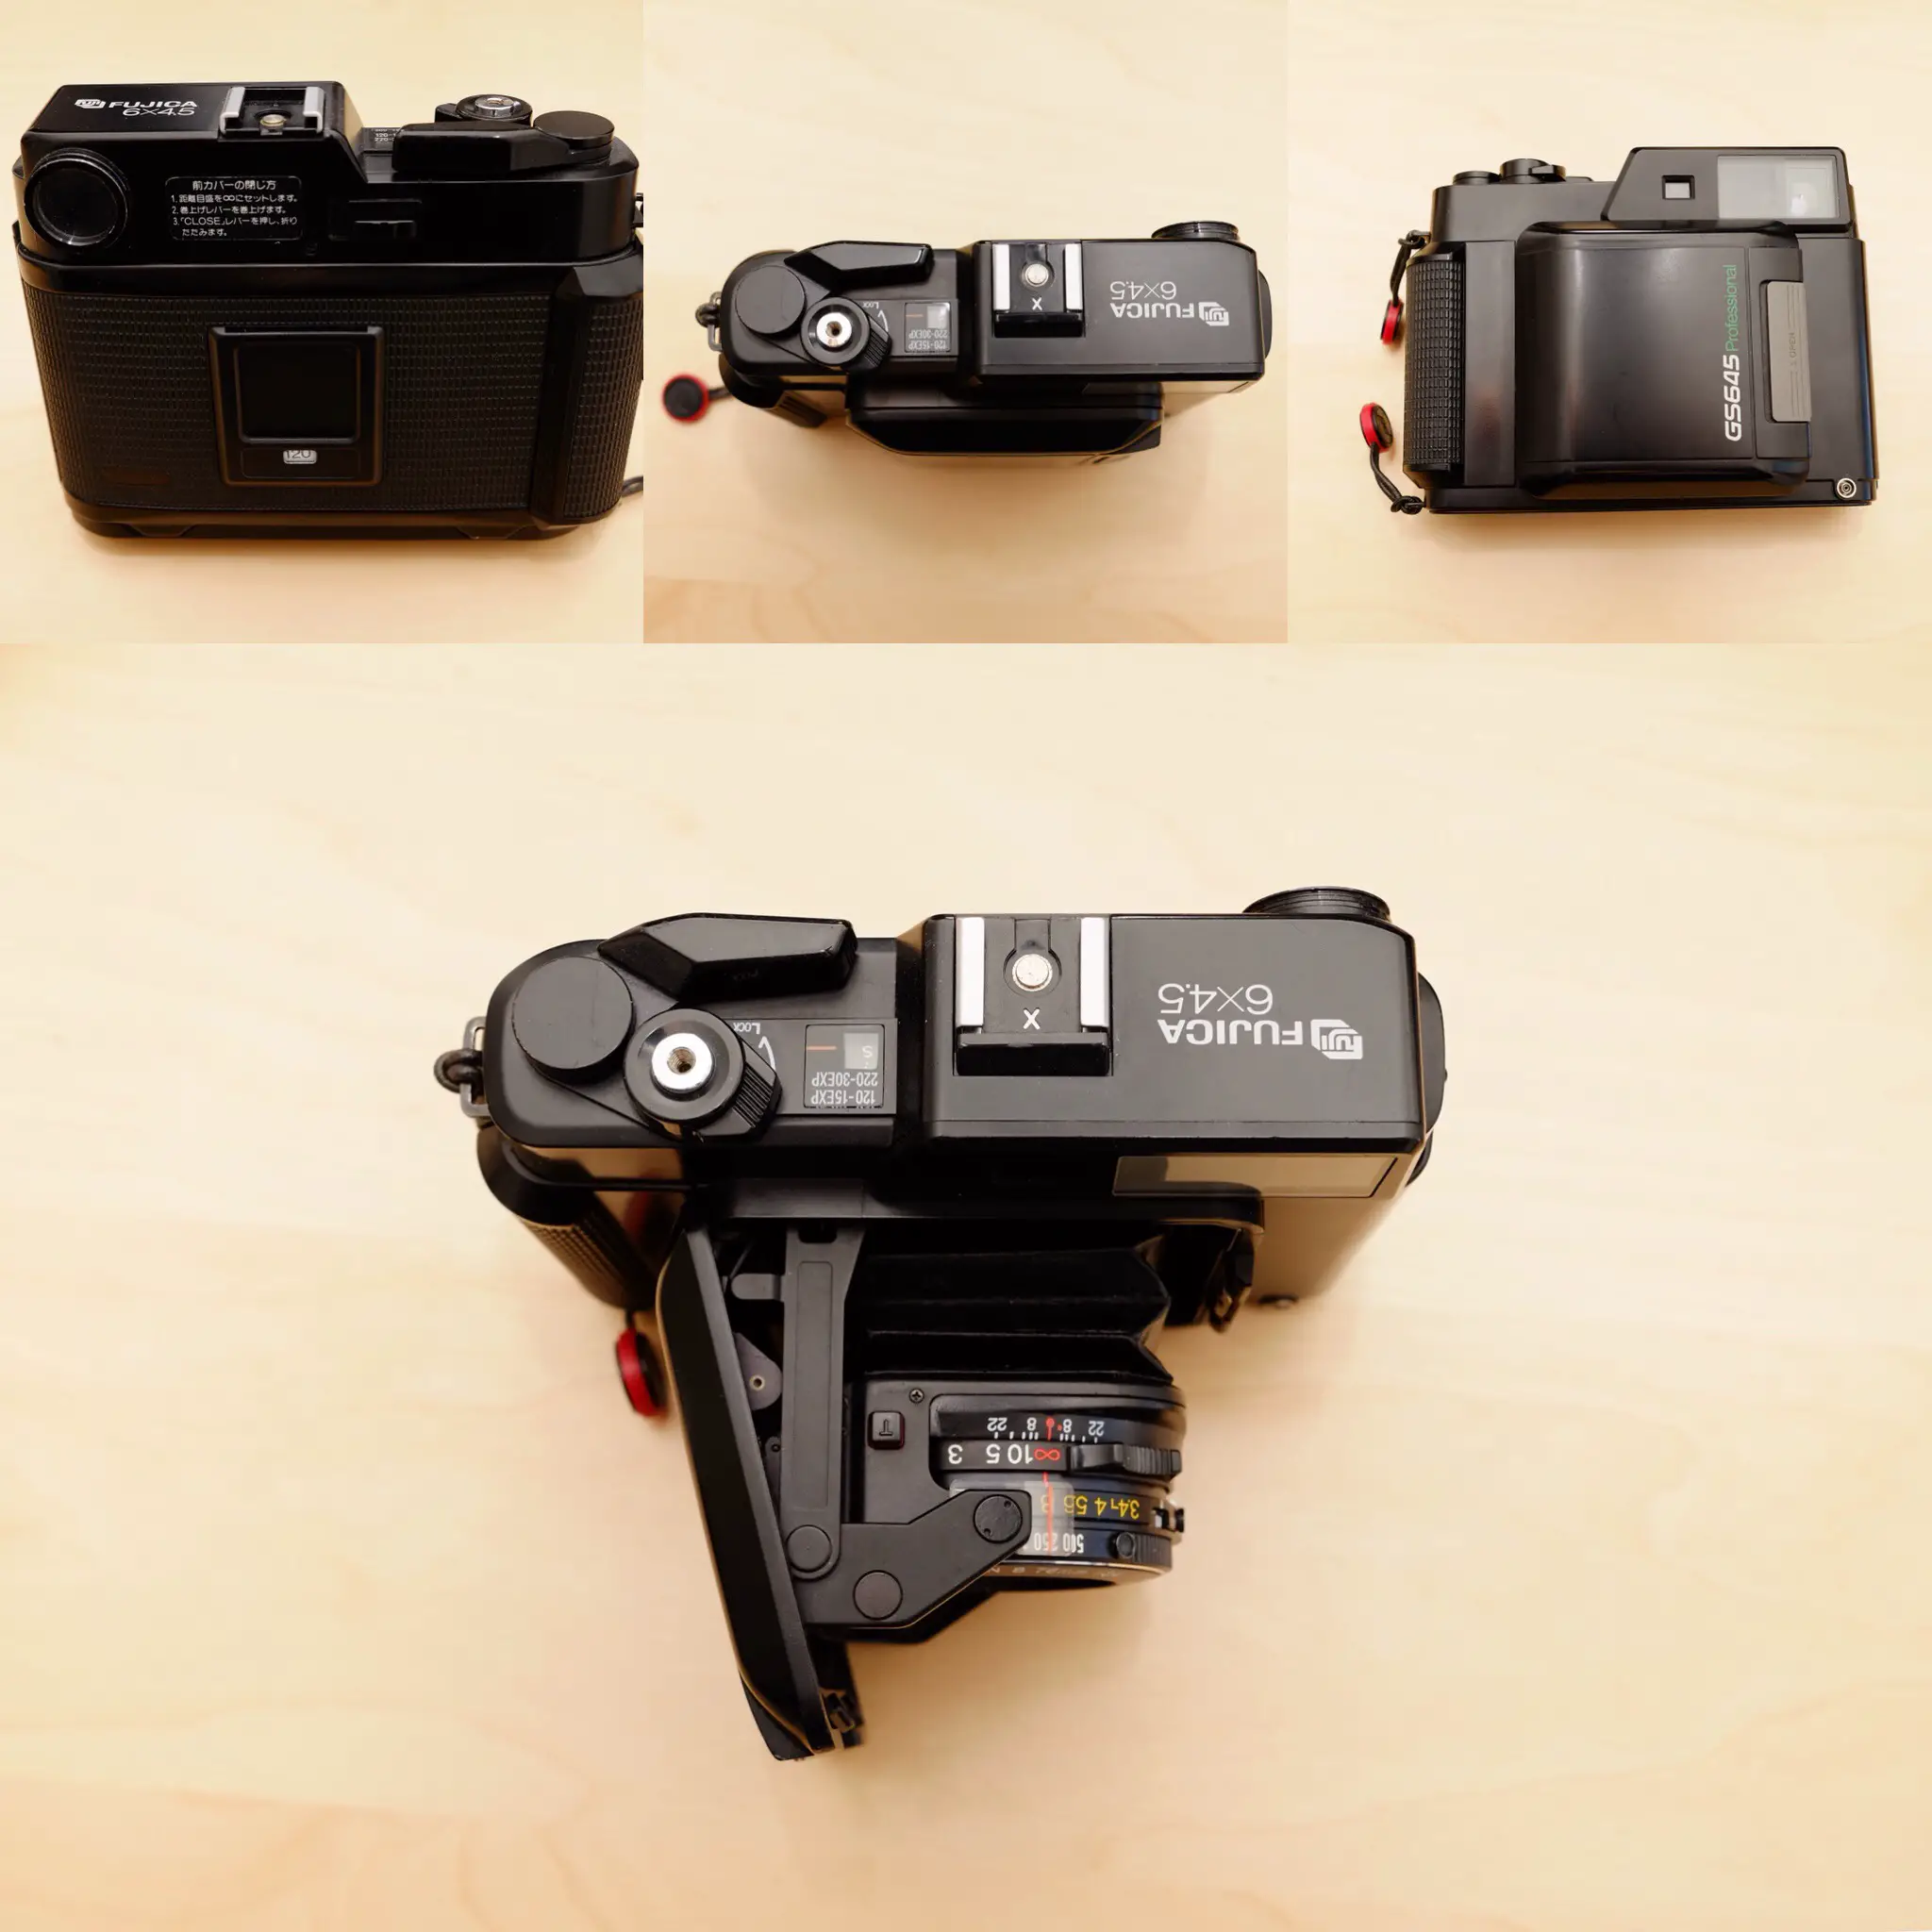 The GS645 from different angles